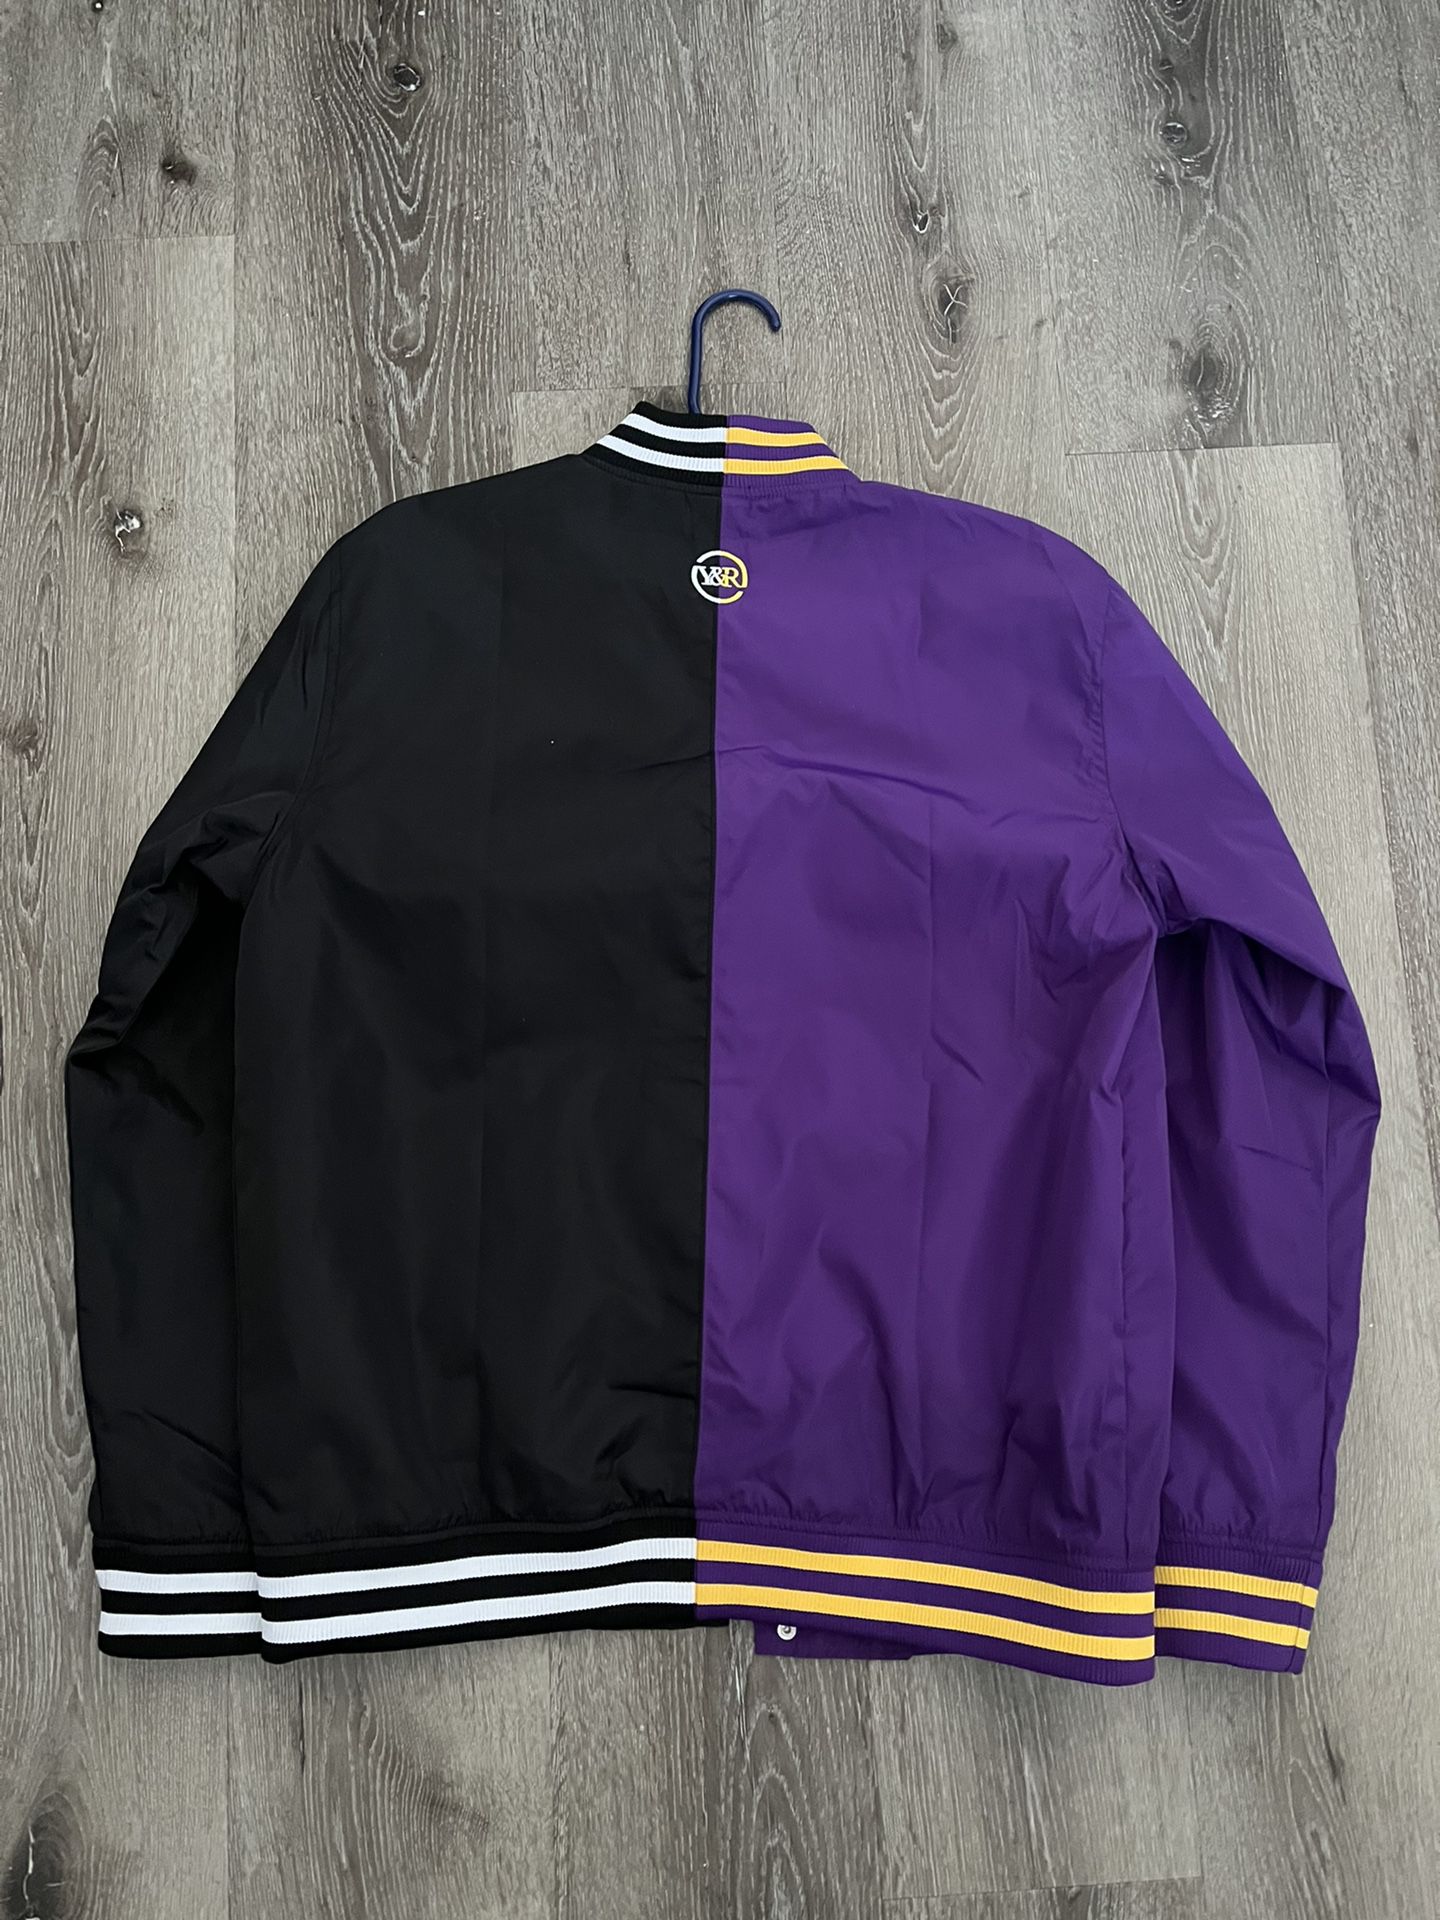 Lakers “City Edition” Jacket - Small for Sale in Alhambra, CA - OfferUp